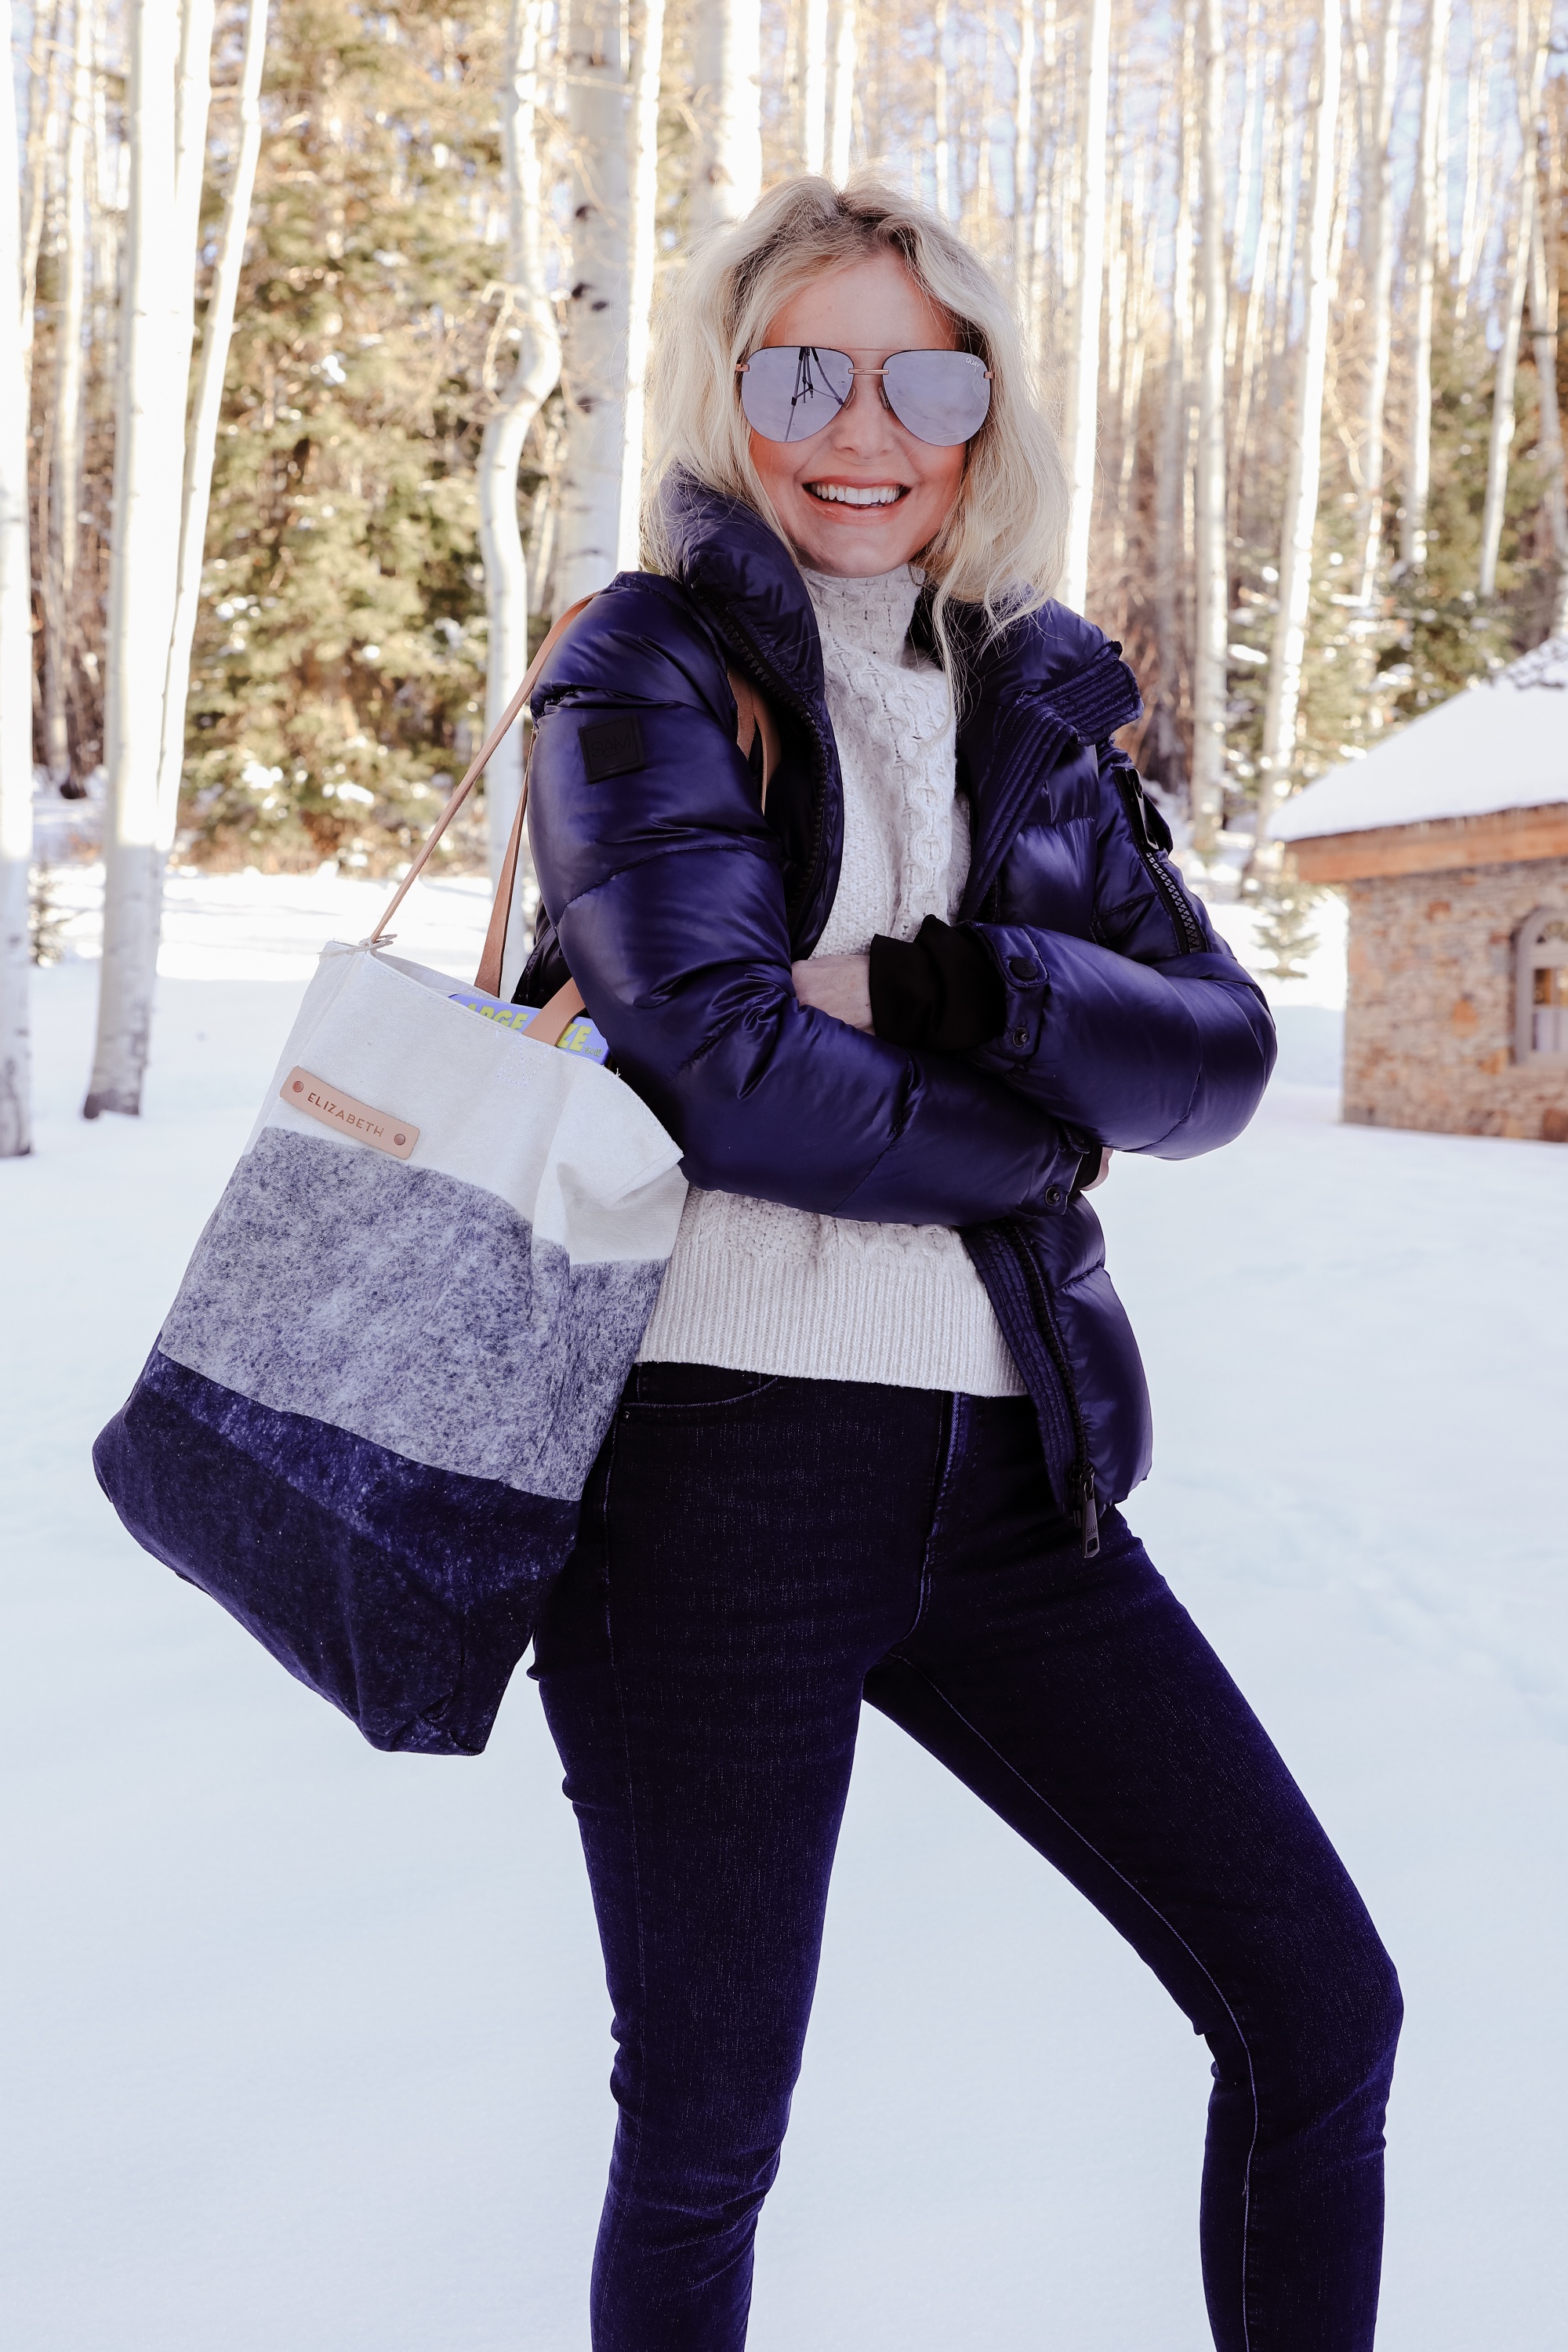 Personalized Gifts, Erin Busbee of Busbee Style carrying a blue and white personalized tote bag from Minted wearing a SAM. puffer jacket with a cable knit sweater and jeans in Telluride, Colorado